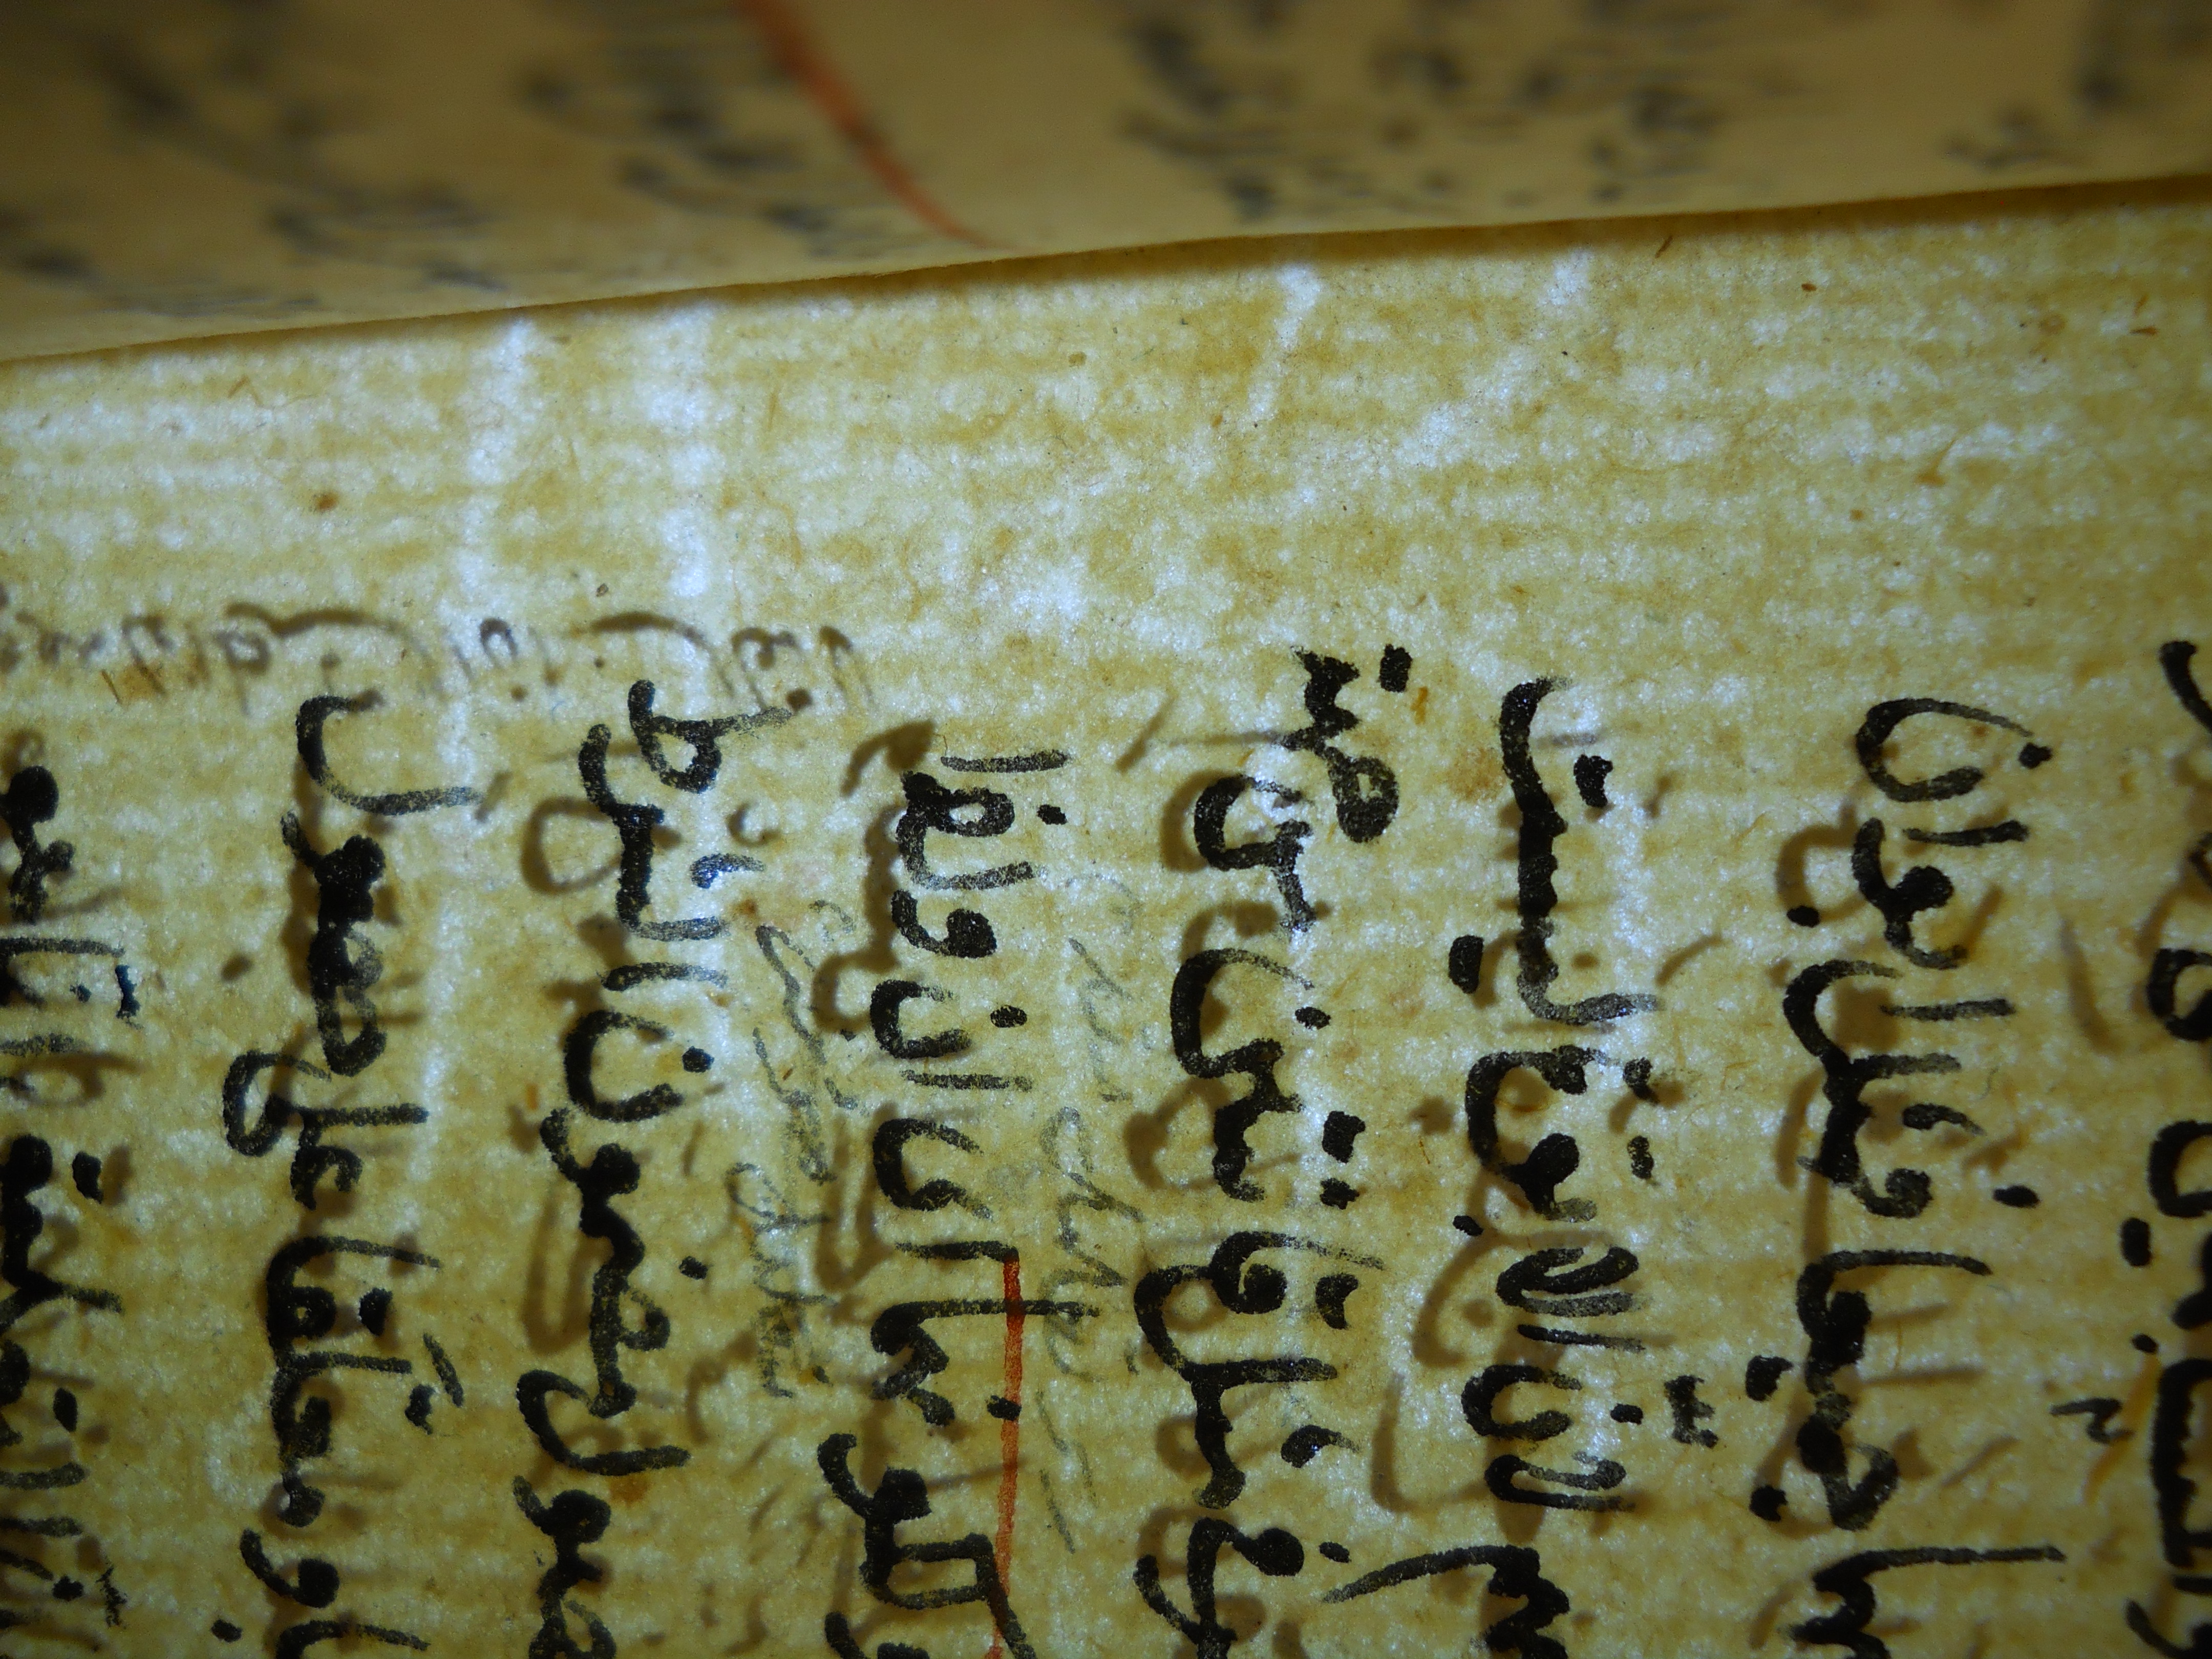 Lower part of capital letter R visible near the gutter in p.94 of Isl. Ms. 147